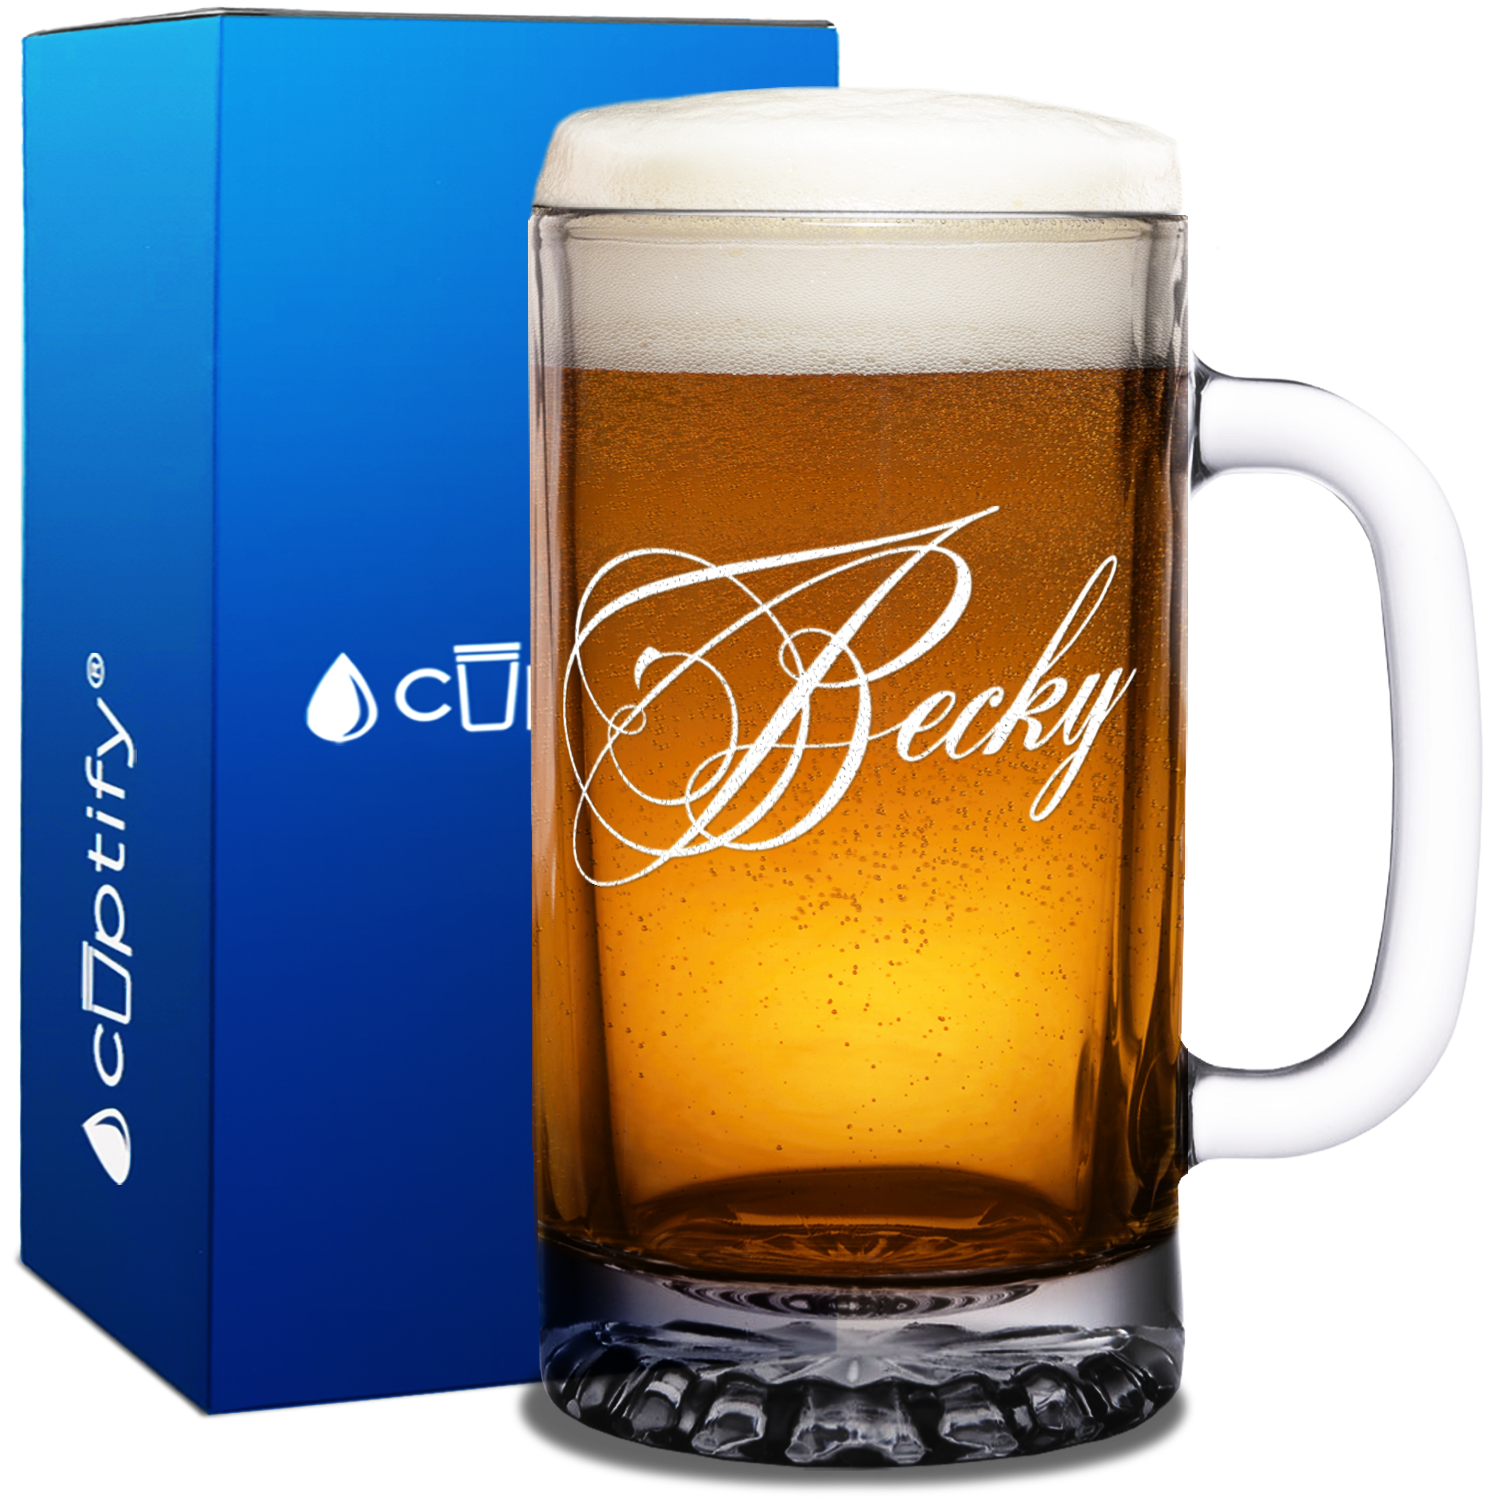 Personalized Decorative Script Etched 16oz Beer Glass Mug